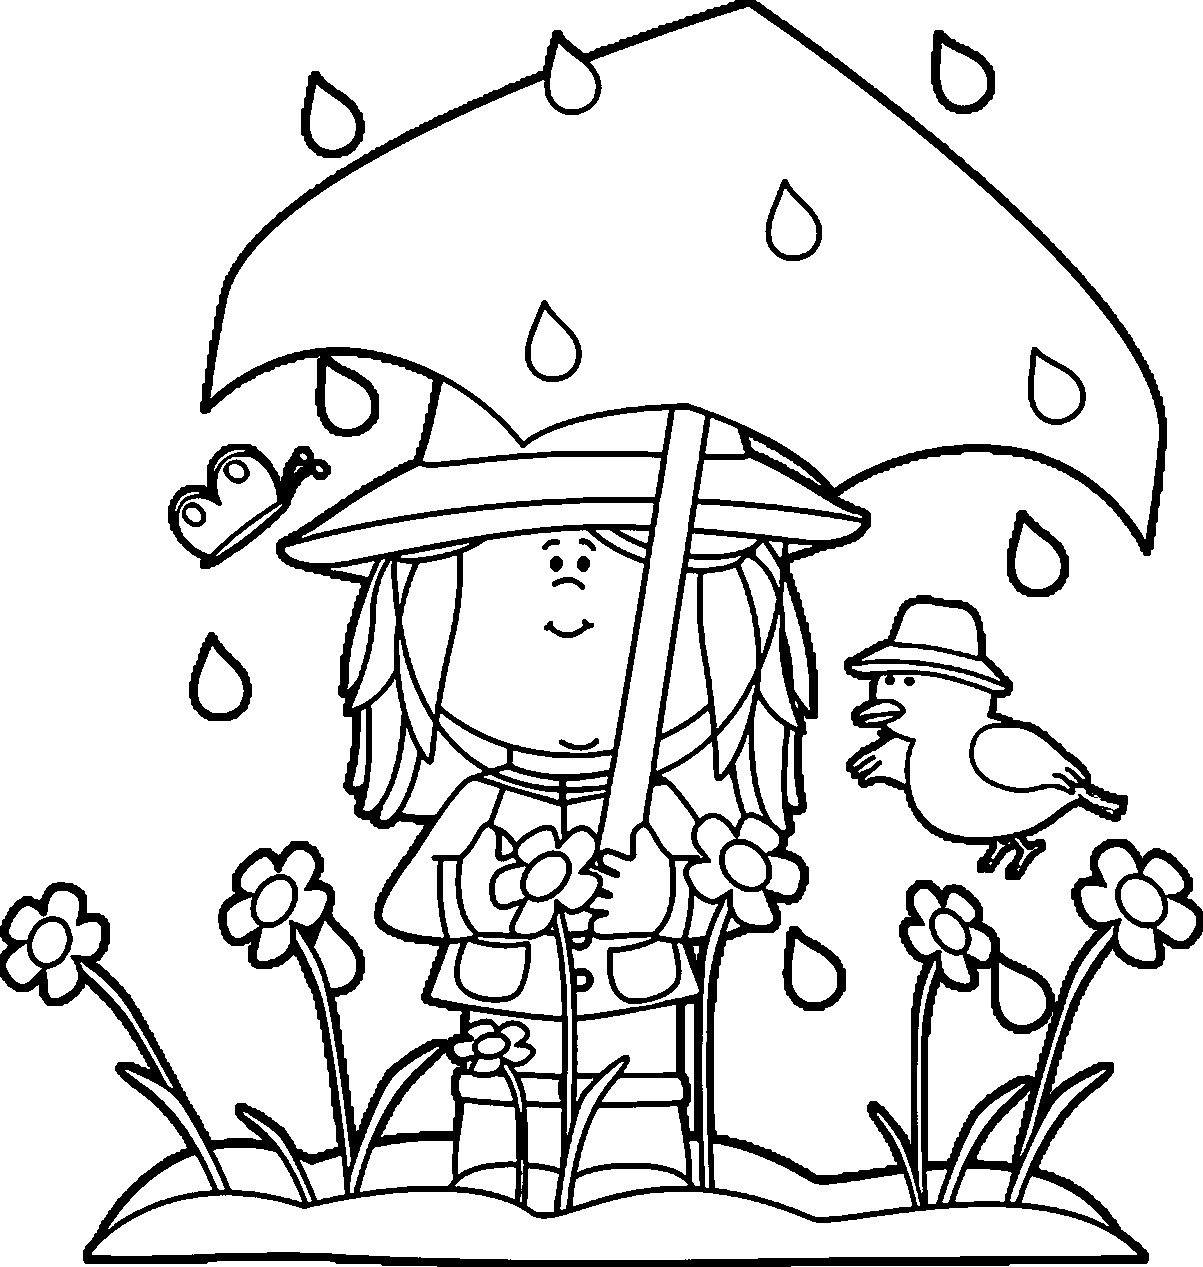 Spring Showers Coloring Page | Wecoloringpage